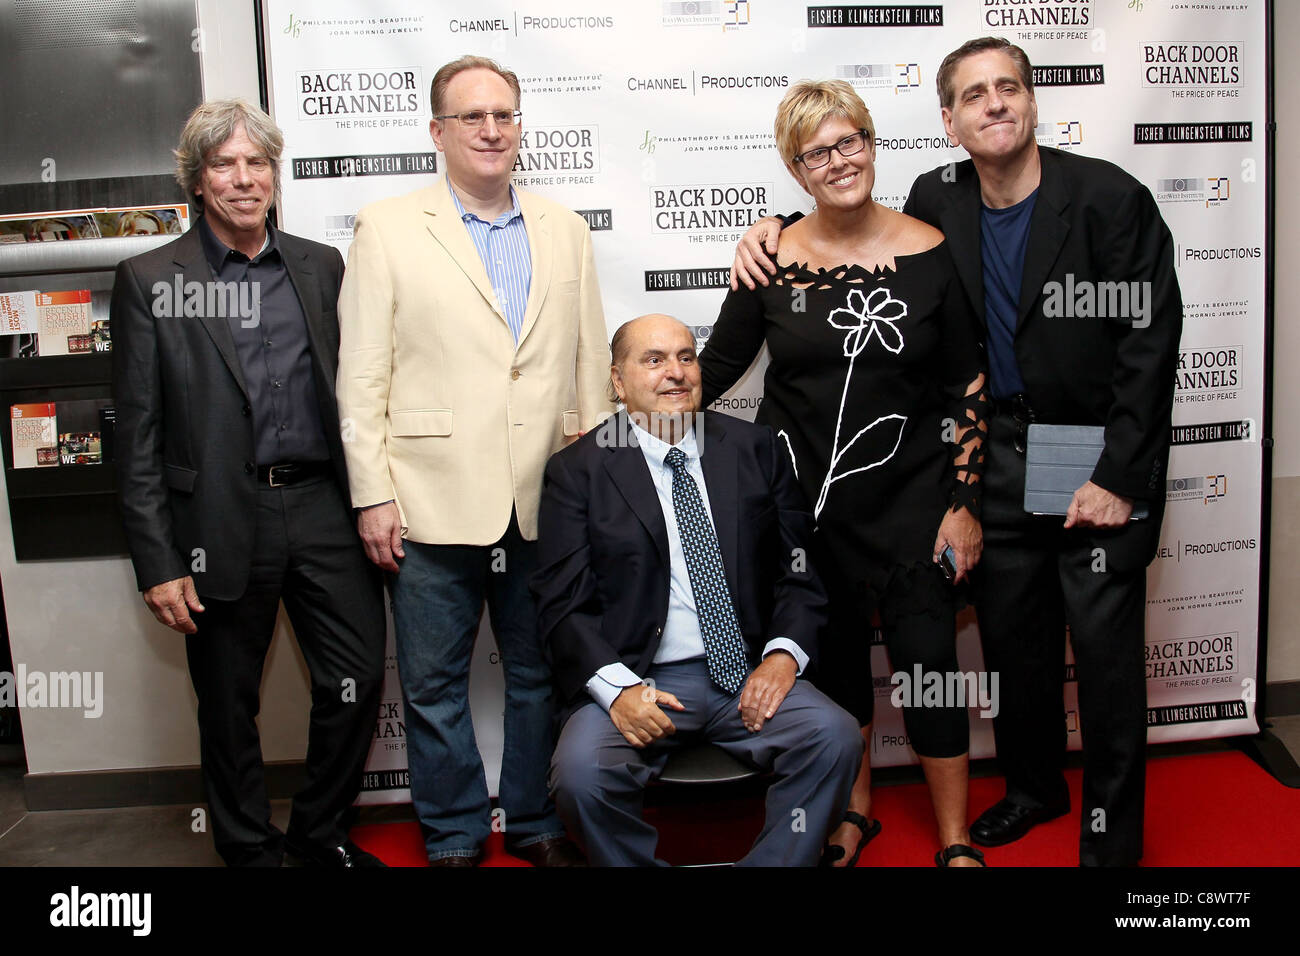 Ken Sunshine, Danny Fisher, Leon Charney, Tzili Charney, Jack Fisher at arrivals for Back Door Channels: The Price of Peace Stock Photo